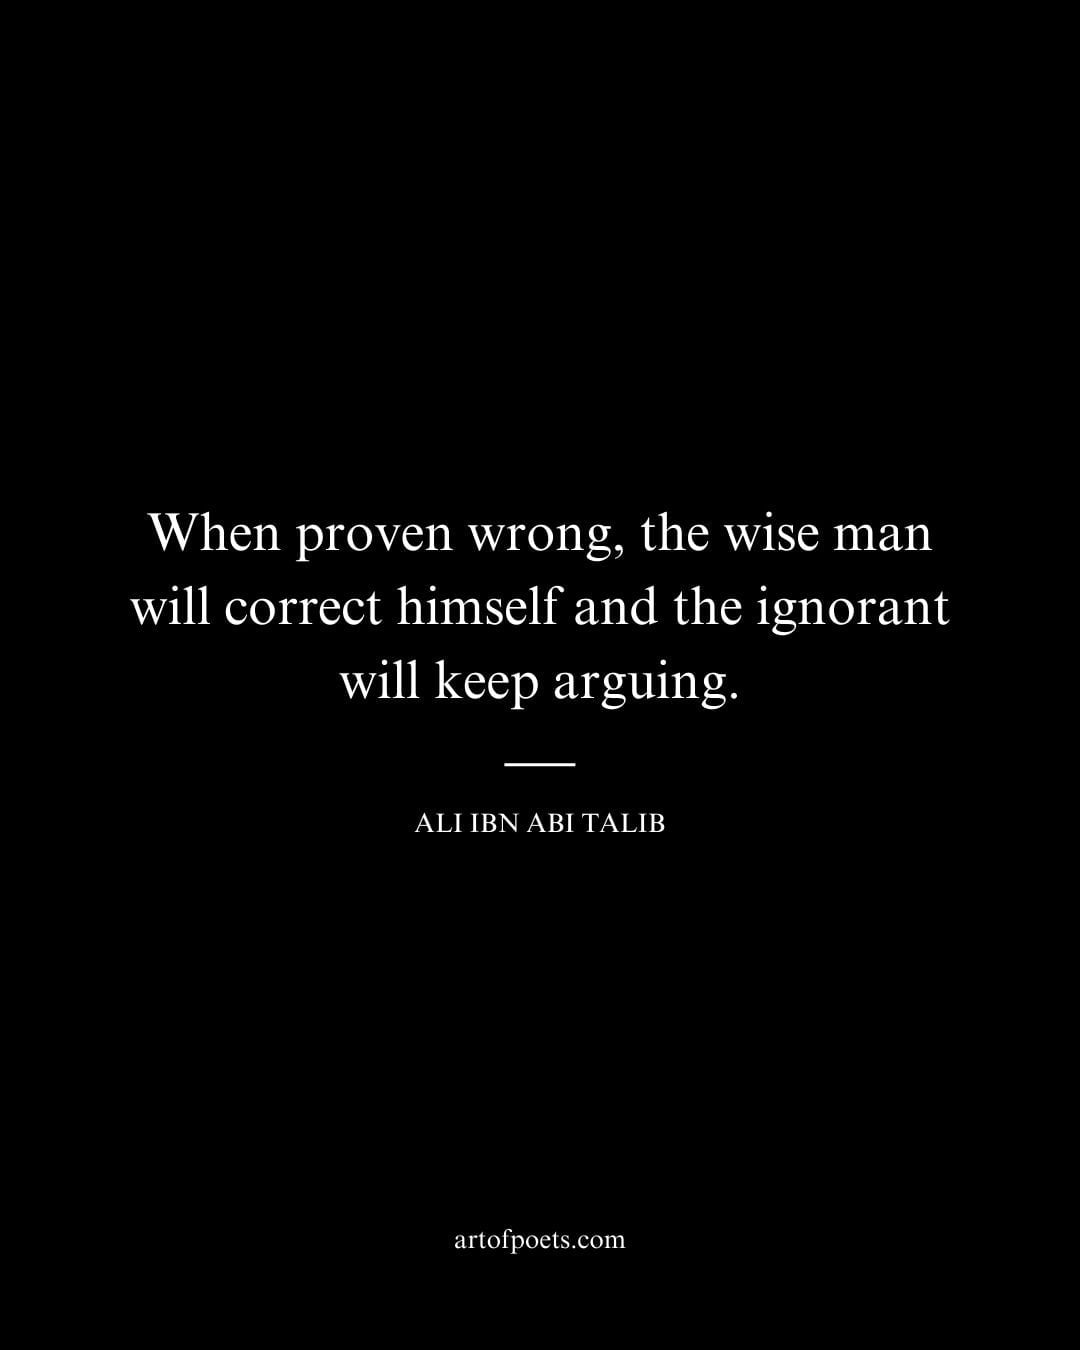 When proven wrong the wise man will correct himself and the ignorant will keep arguing